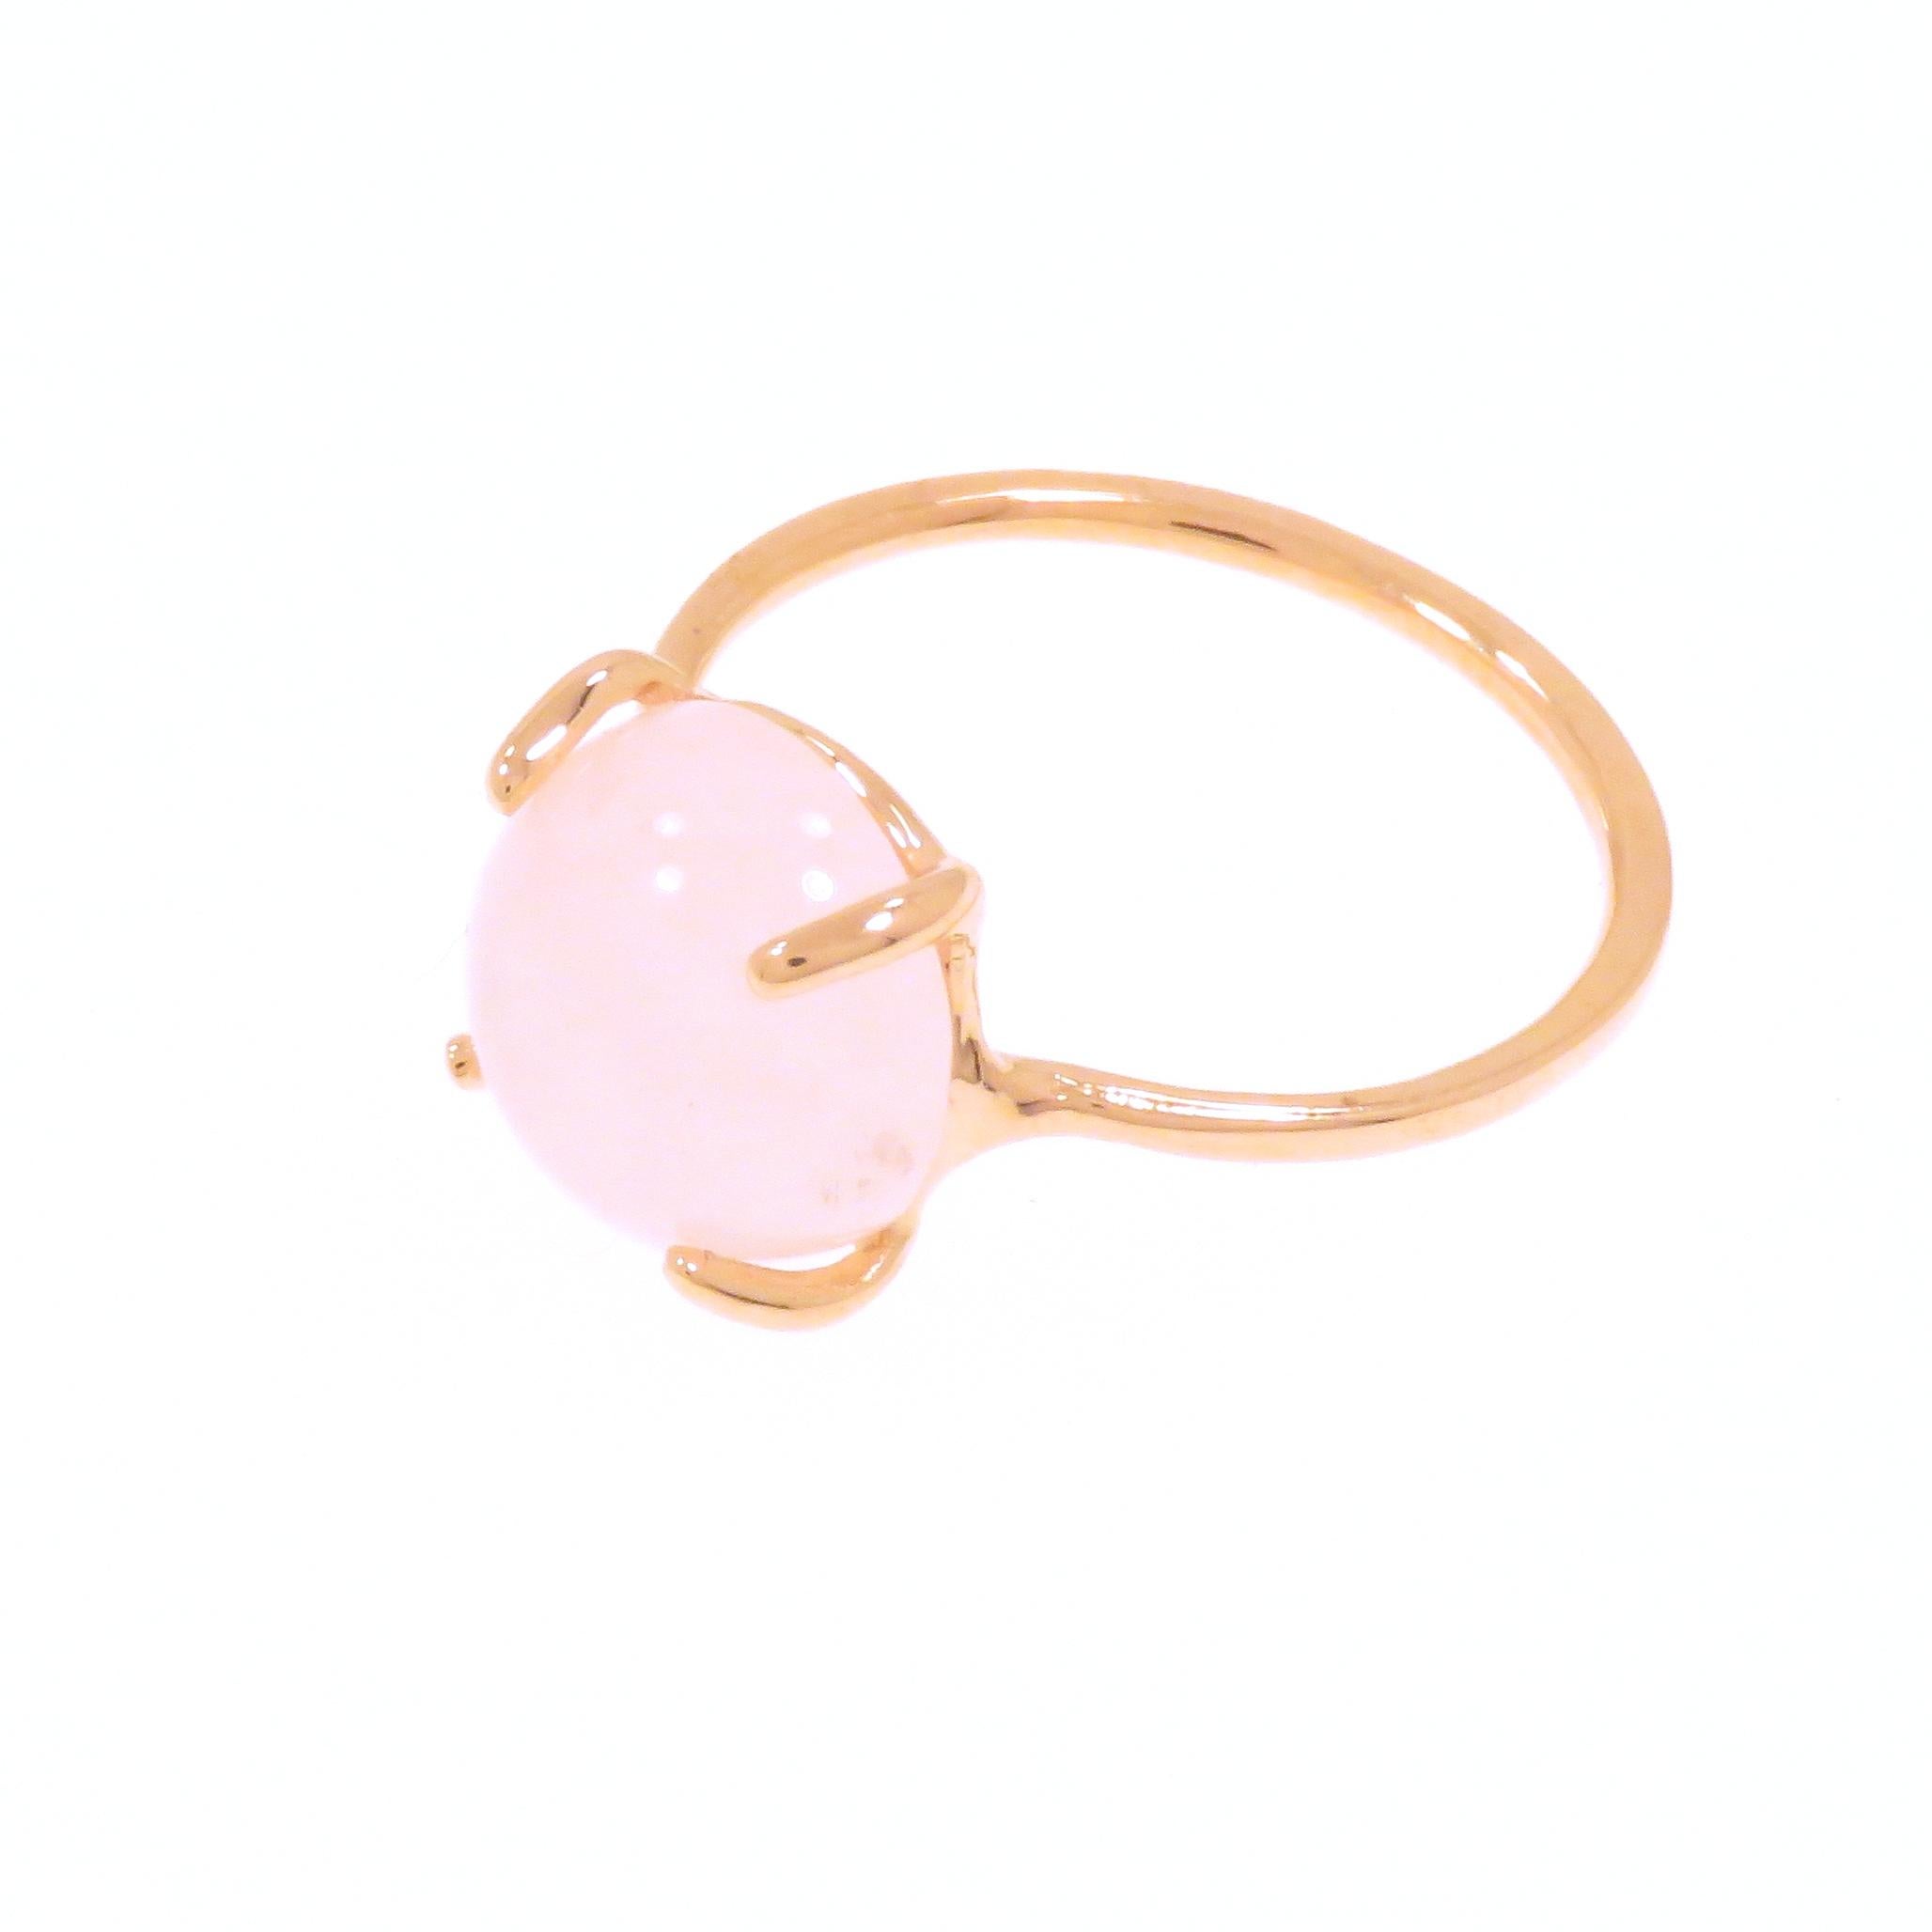 Cabochon Rose Quartz 9 Karat Rose Gold Ring Handcrafted in, Italy For Sale